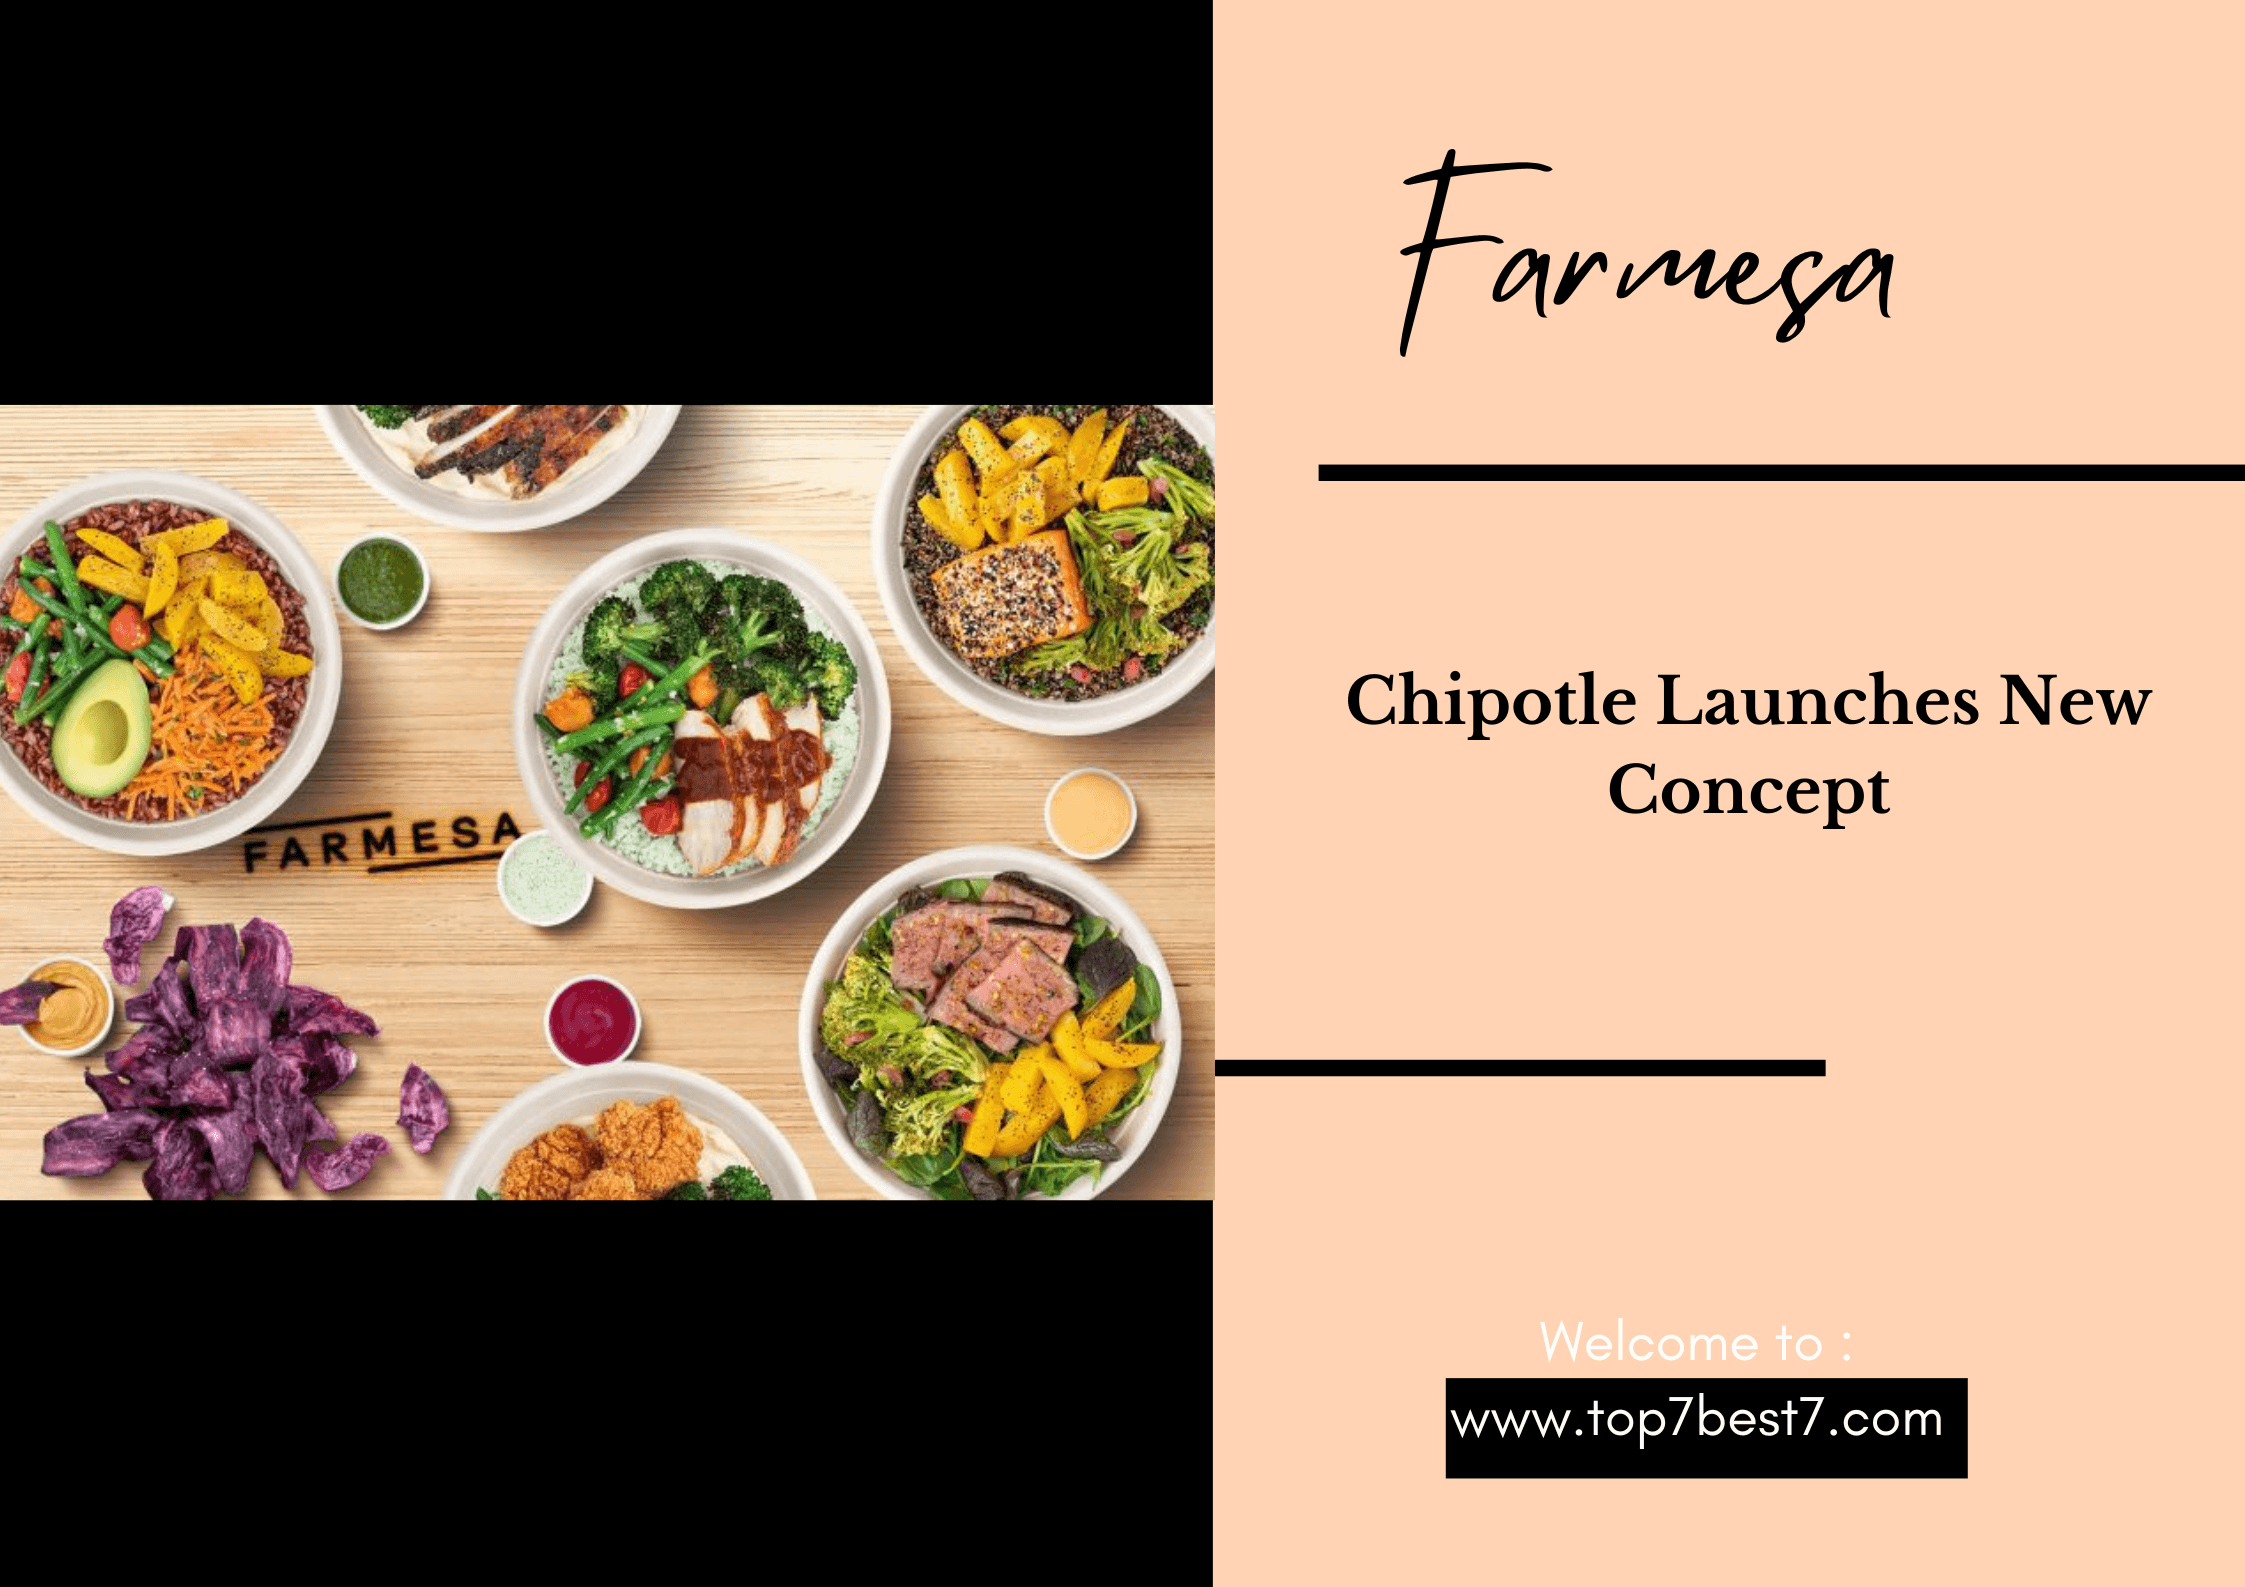 You are currently viewing Chipotle Launches New Concept, to enter food-bowl business, Farmesa